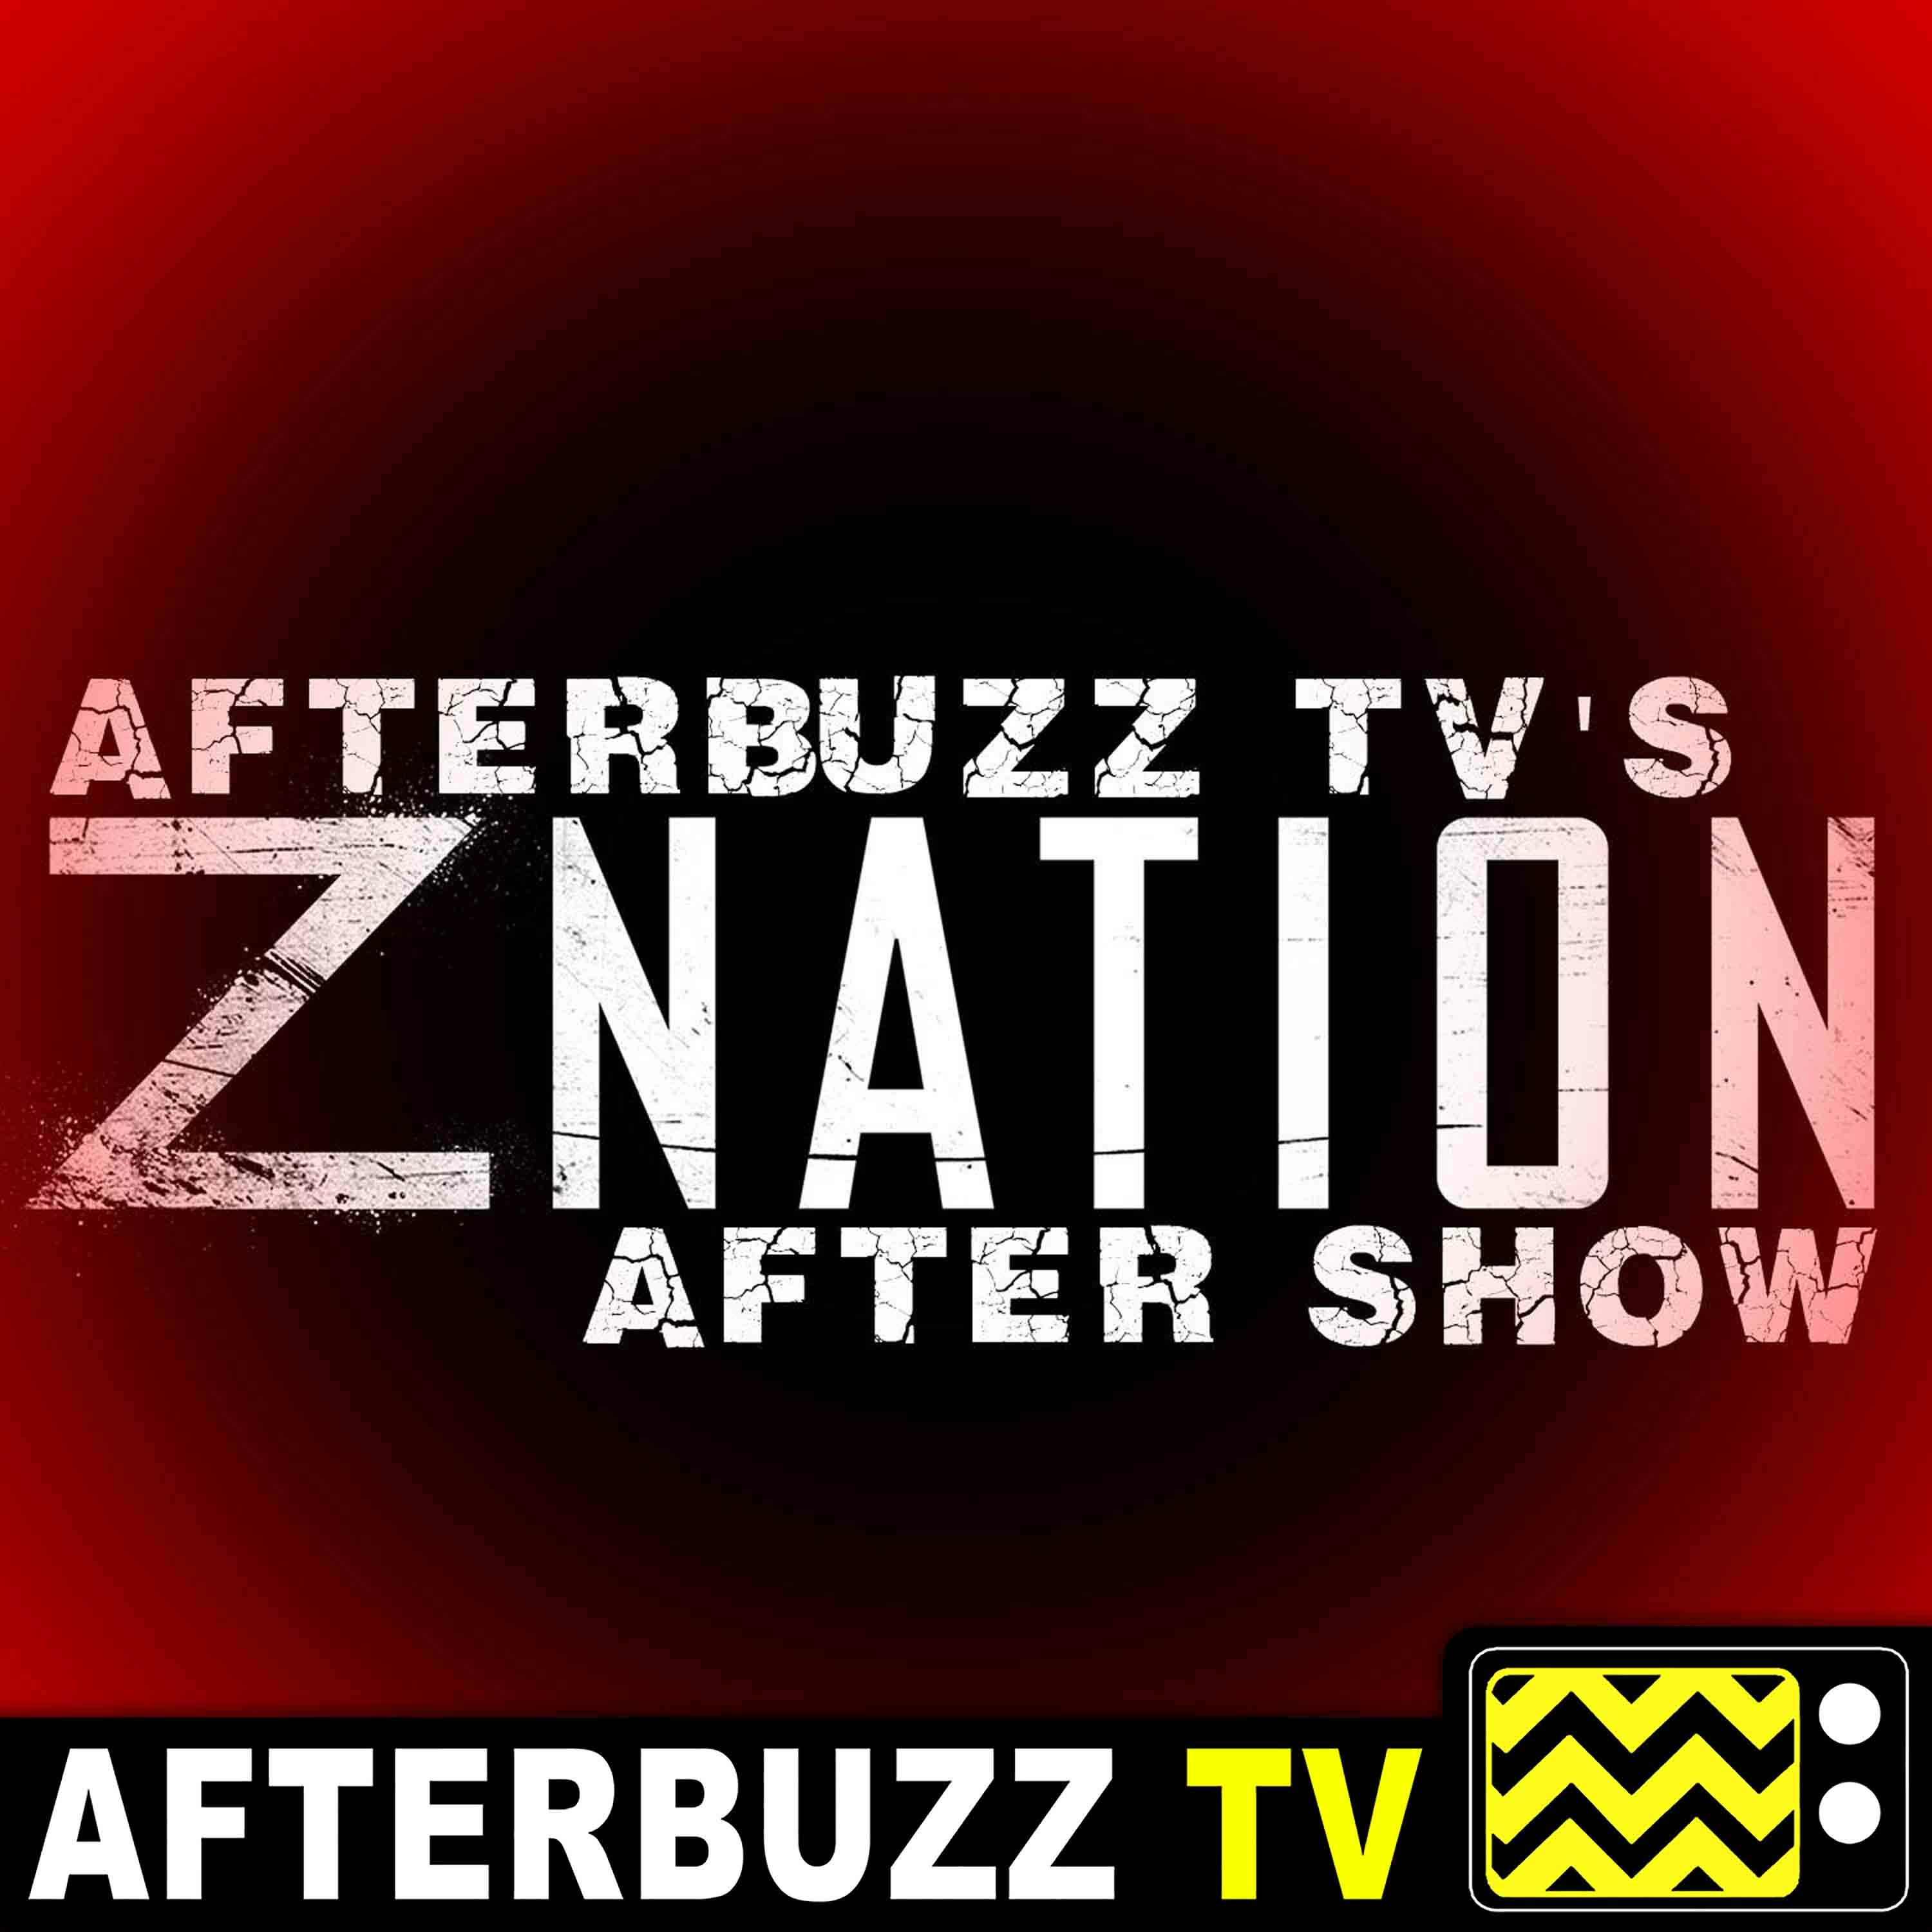 Z Nation S:4 | Michael Cassutt & Sara Coates Guest on Back From the Undead E:6 | AfterBuzz TV AfterShow